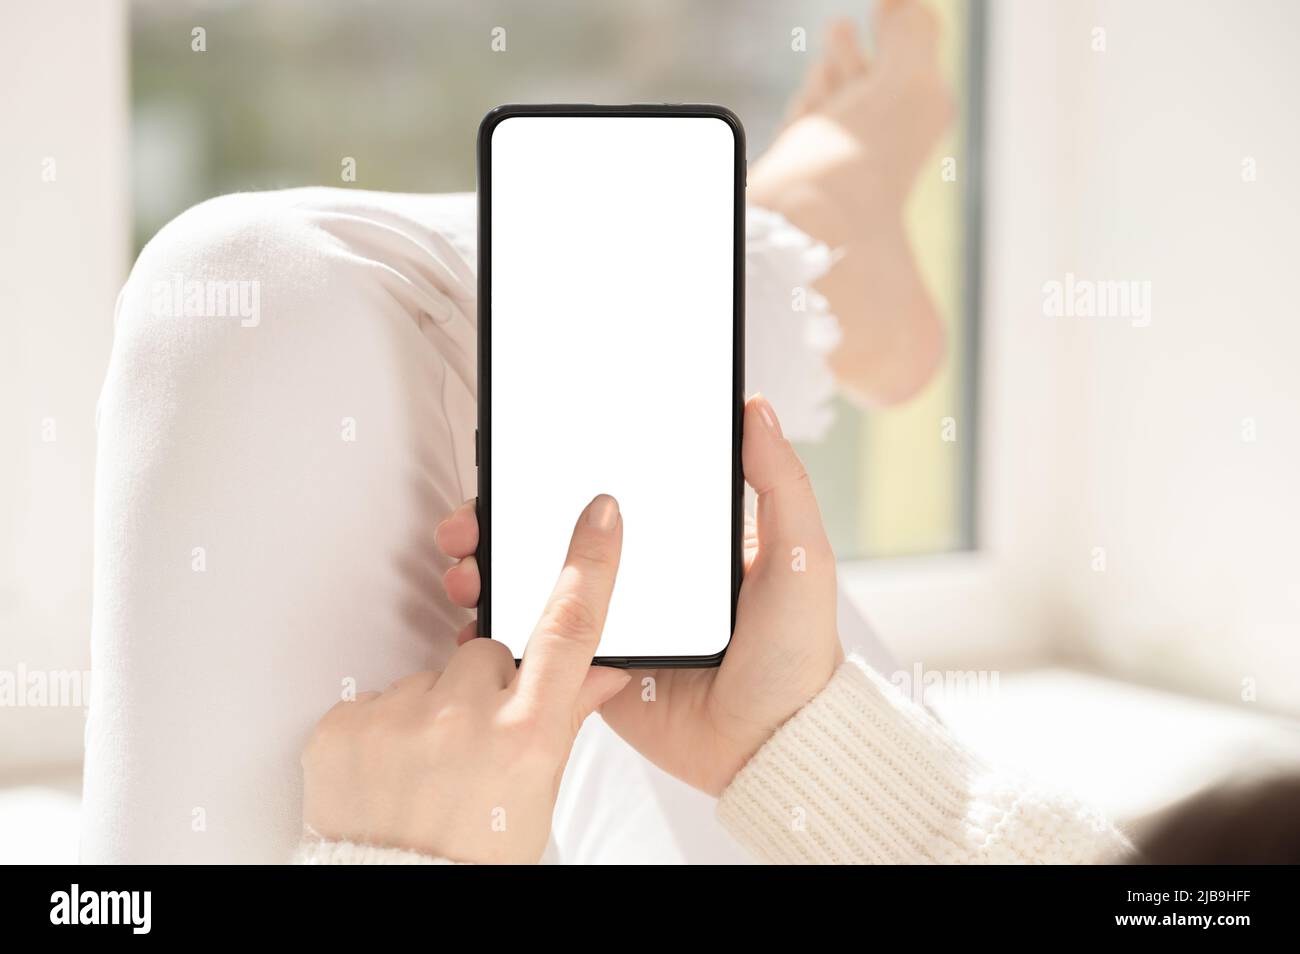 Cellphone mockup. woman finger presses on cell phone screen. Use mobile shopping app, check social media news, texting mobile sms order food delivery Stock Photo